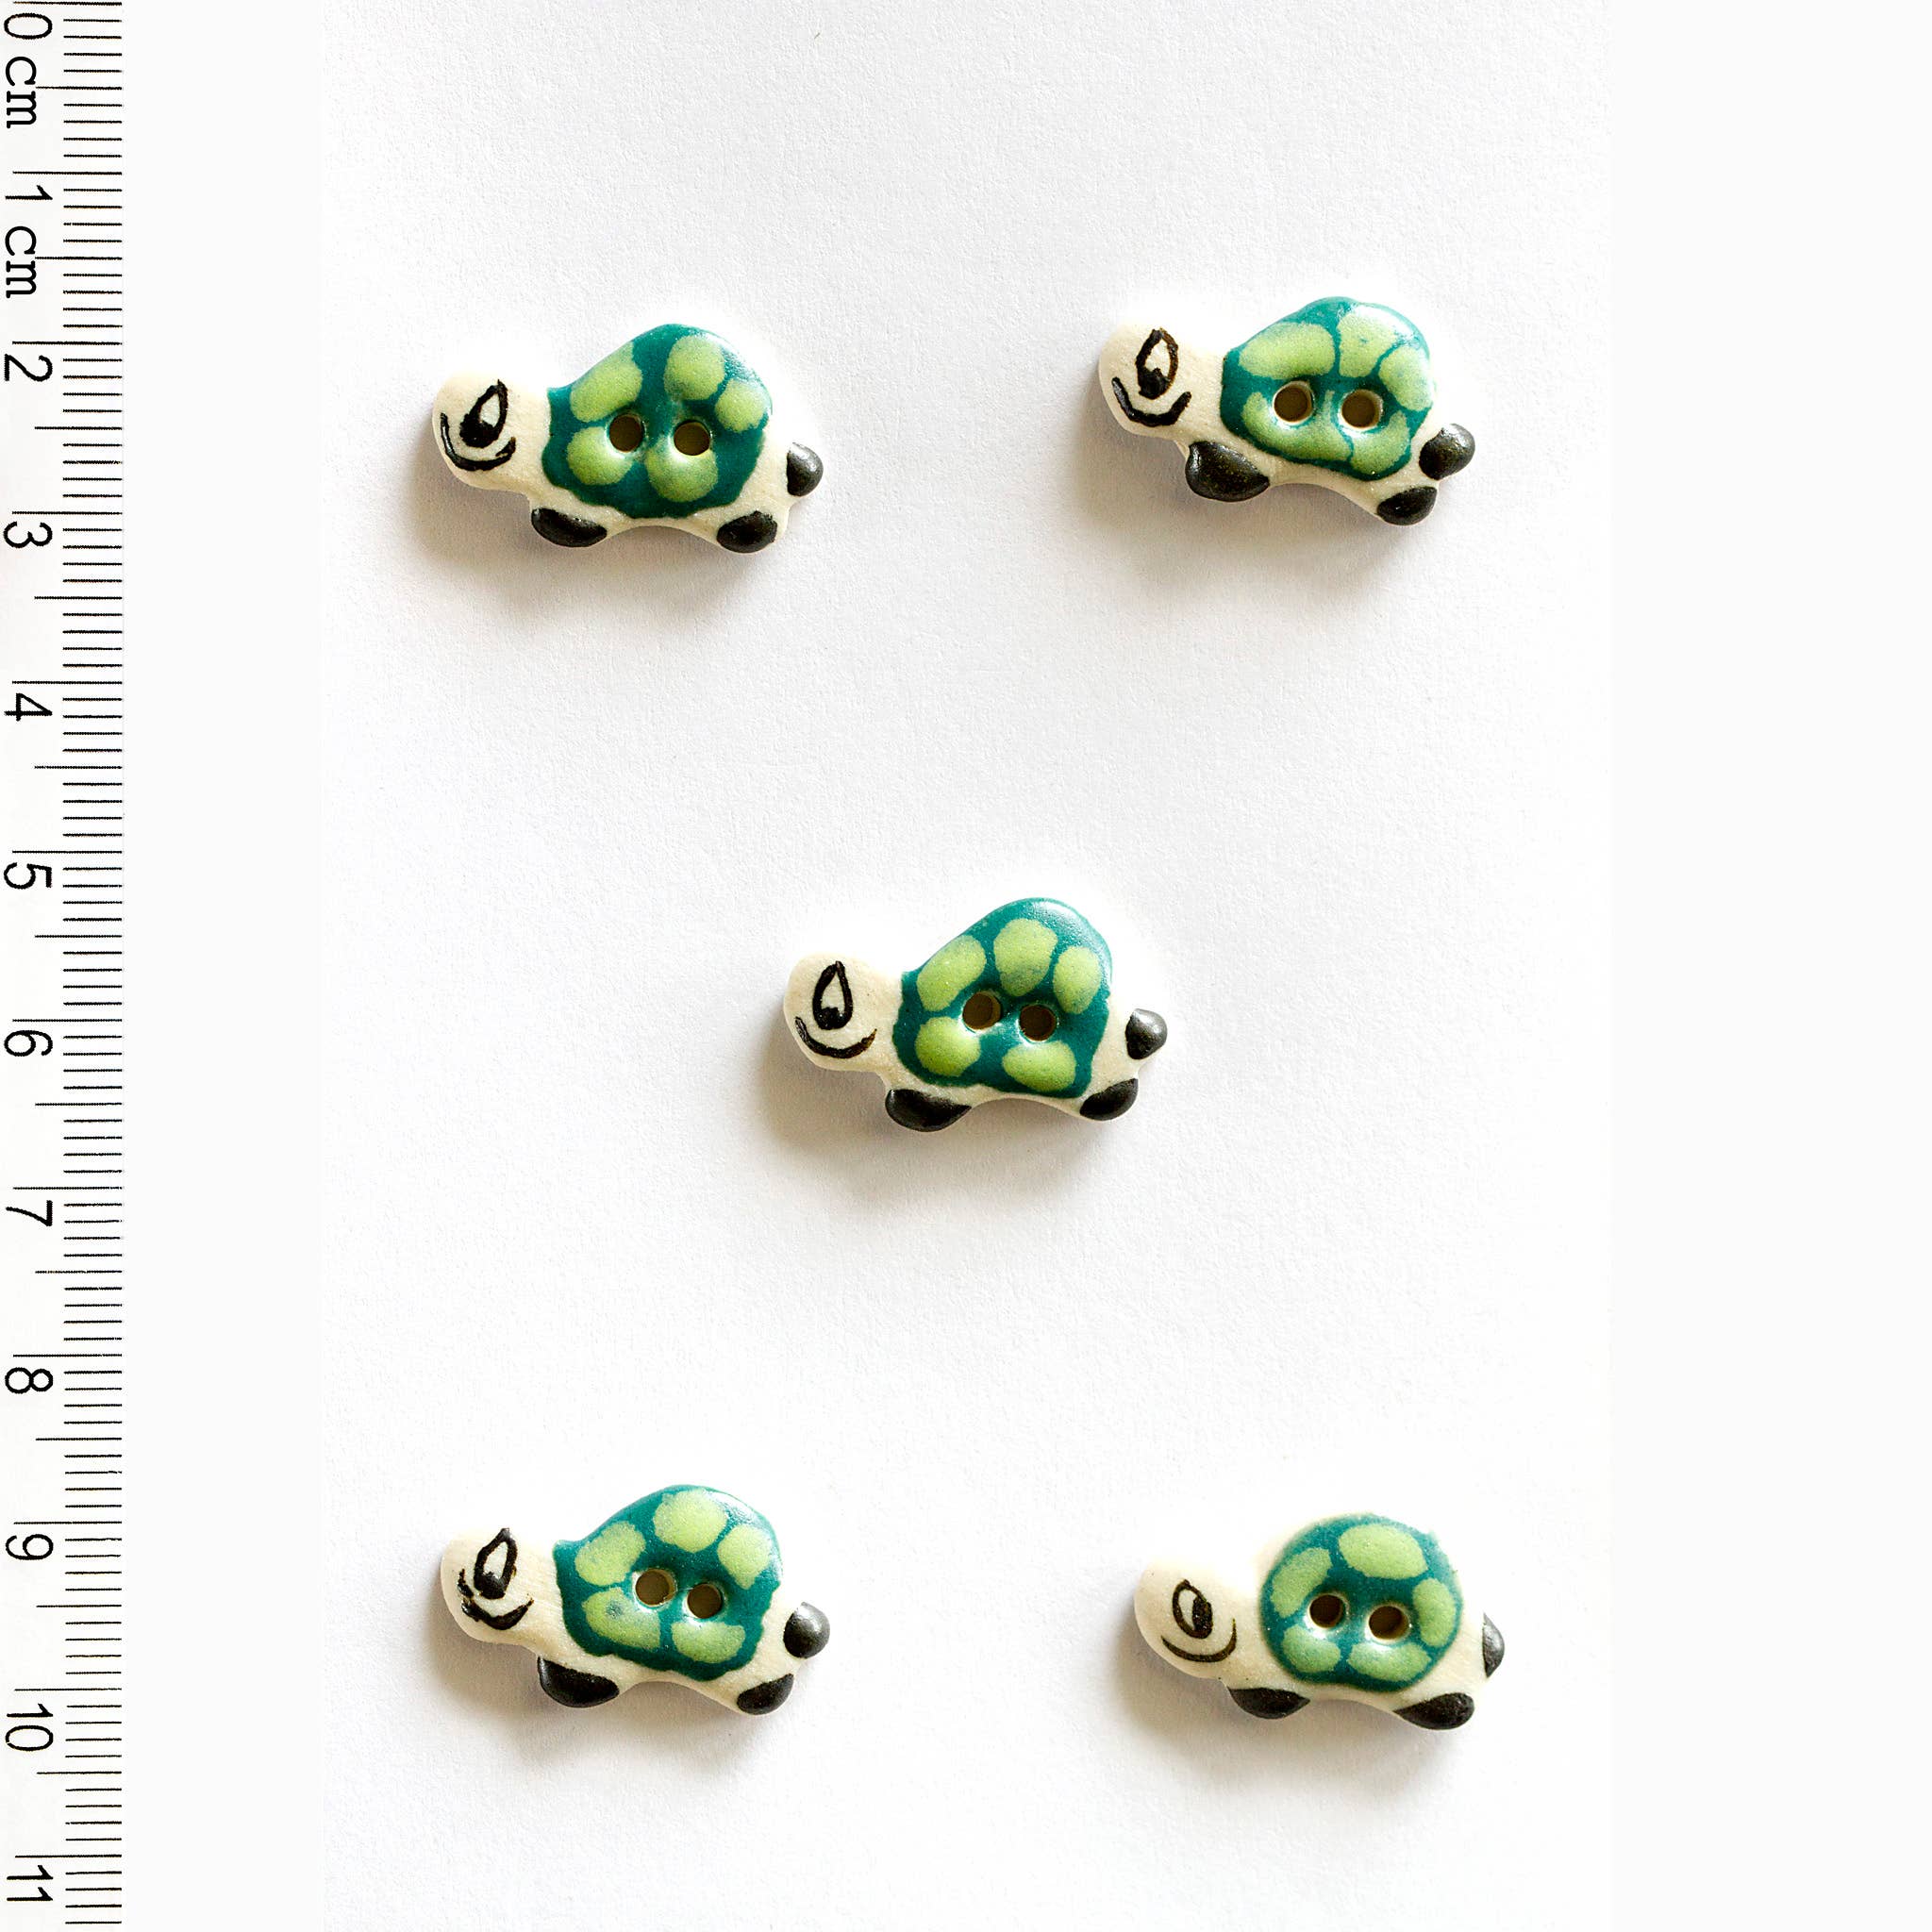 Incomparable Buttons - 5 Tortoise Buttons